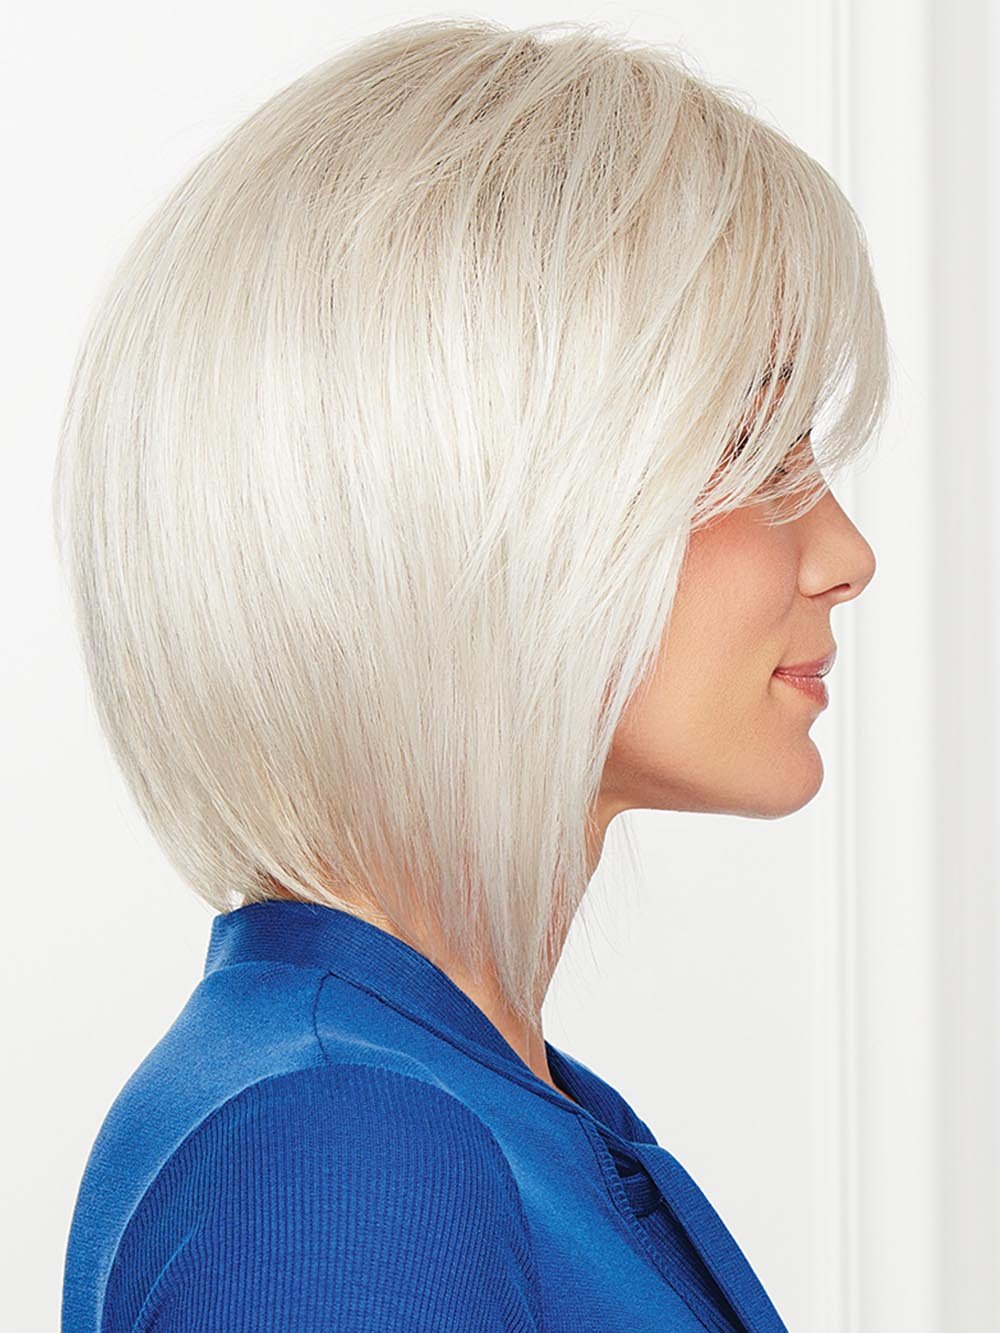 Tousled, tapered layers throughout to create the perfect undone look while longer pieces in the front flatter the face